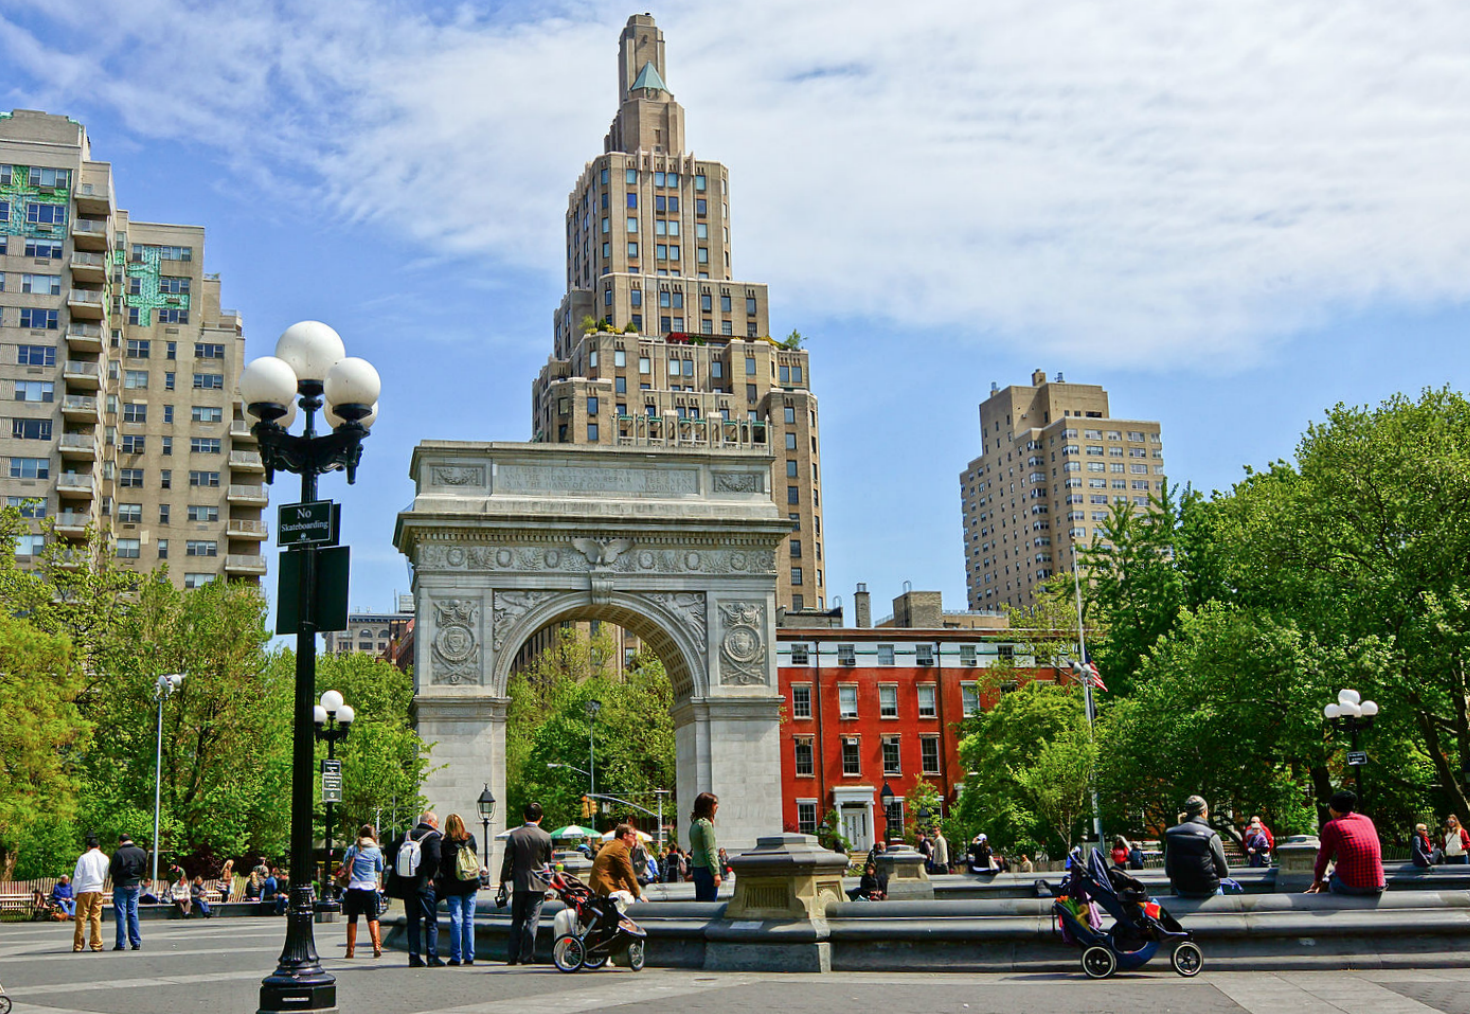 A view of the Washington Square Arch and fountain on a sunny day.